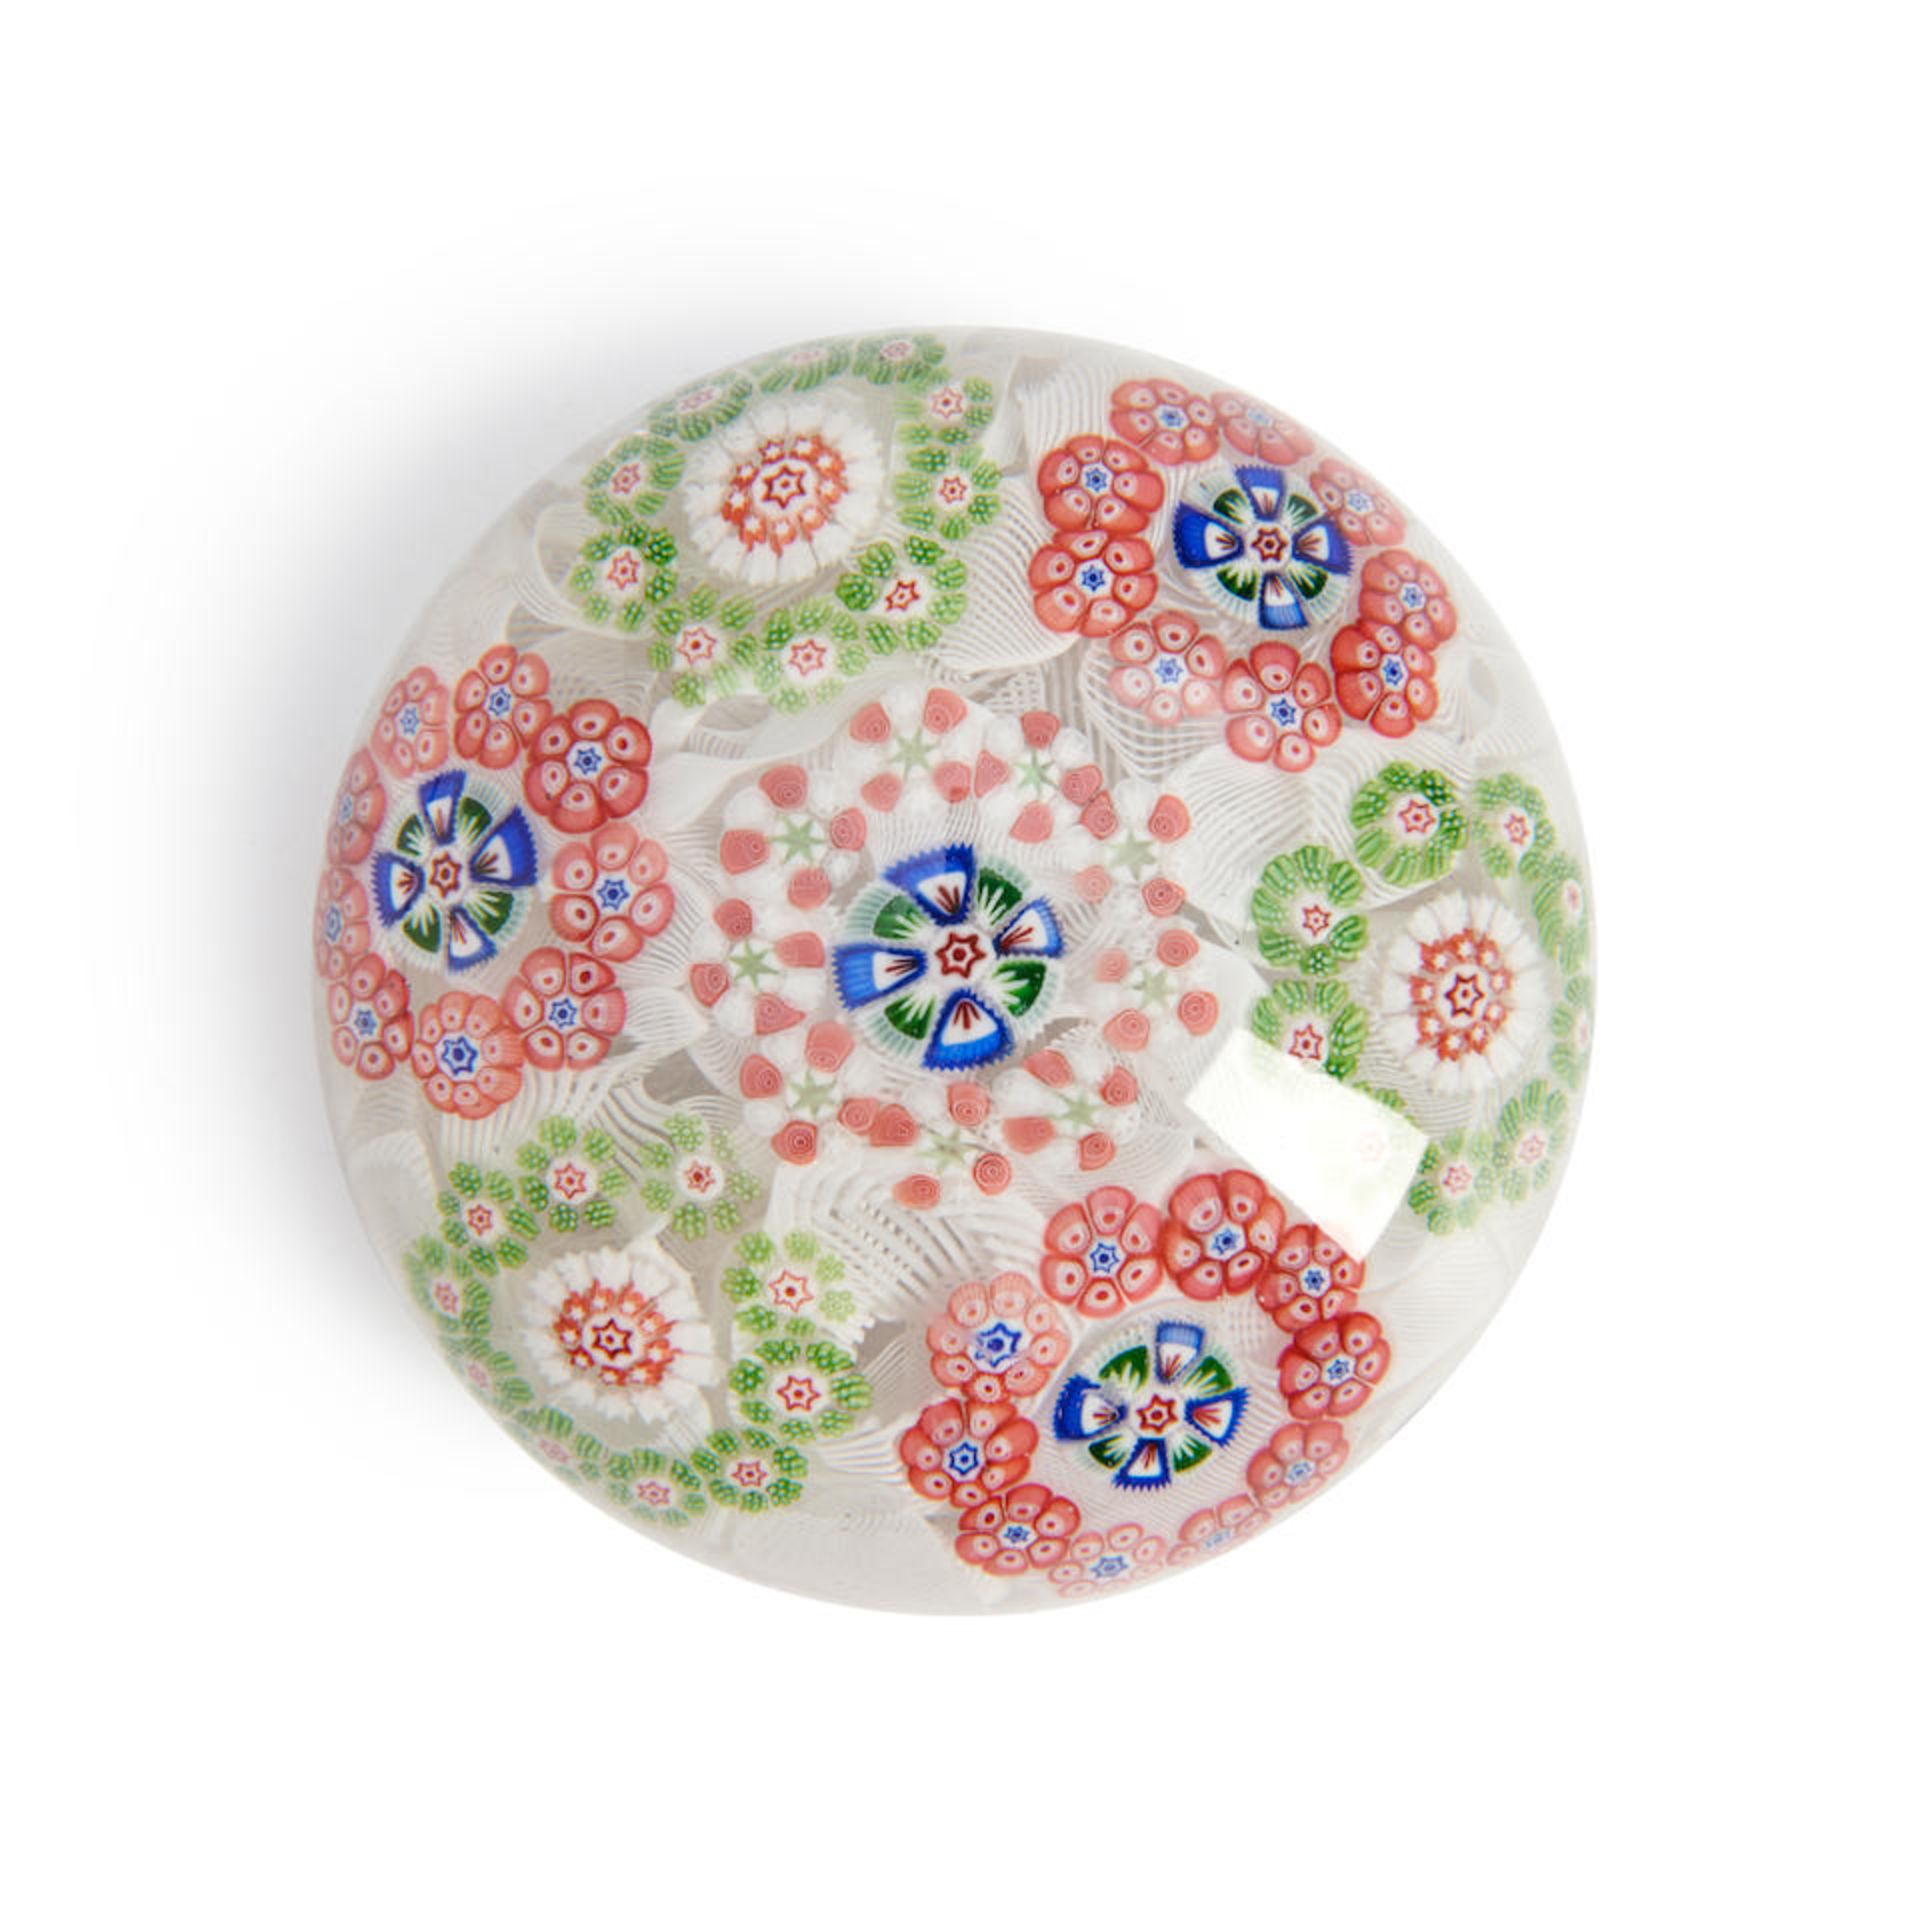 BACCARAT MILLEFIORI CIRCLETS GLASS PAPERWEIGHT, France, green and pink circles on upset muslin g...